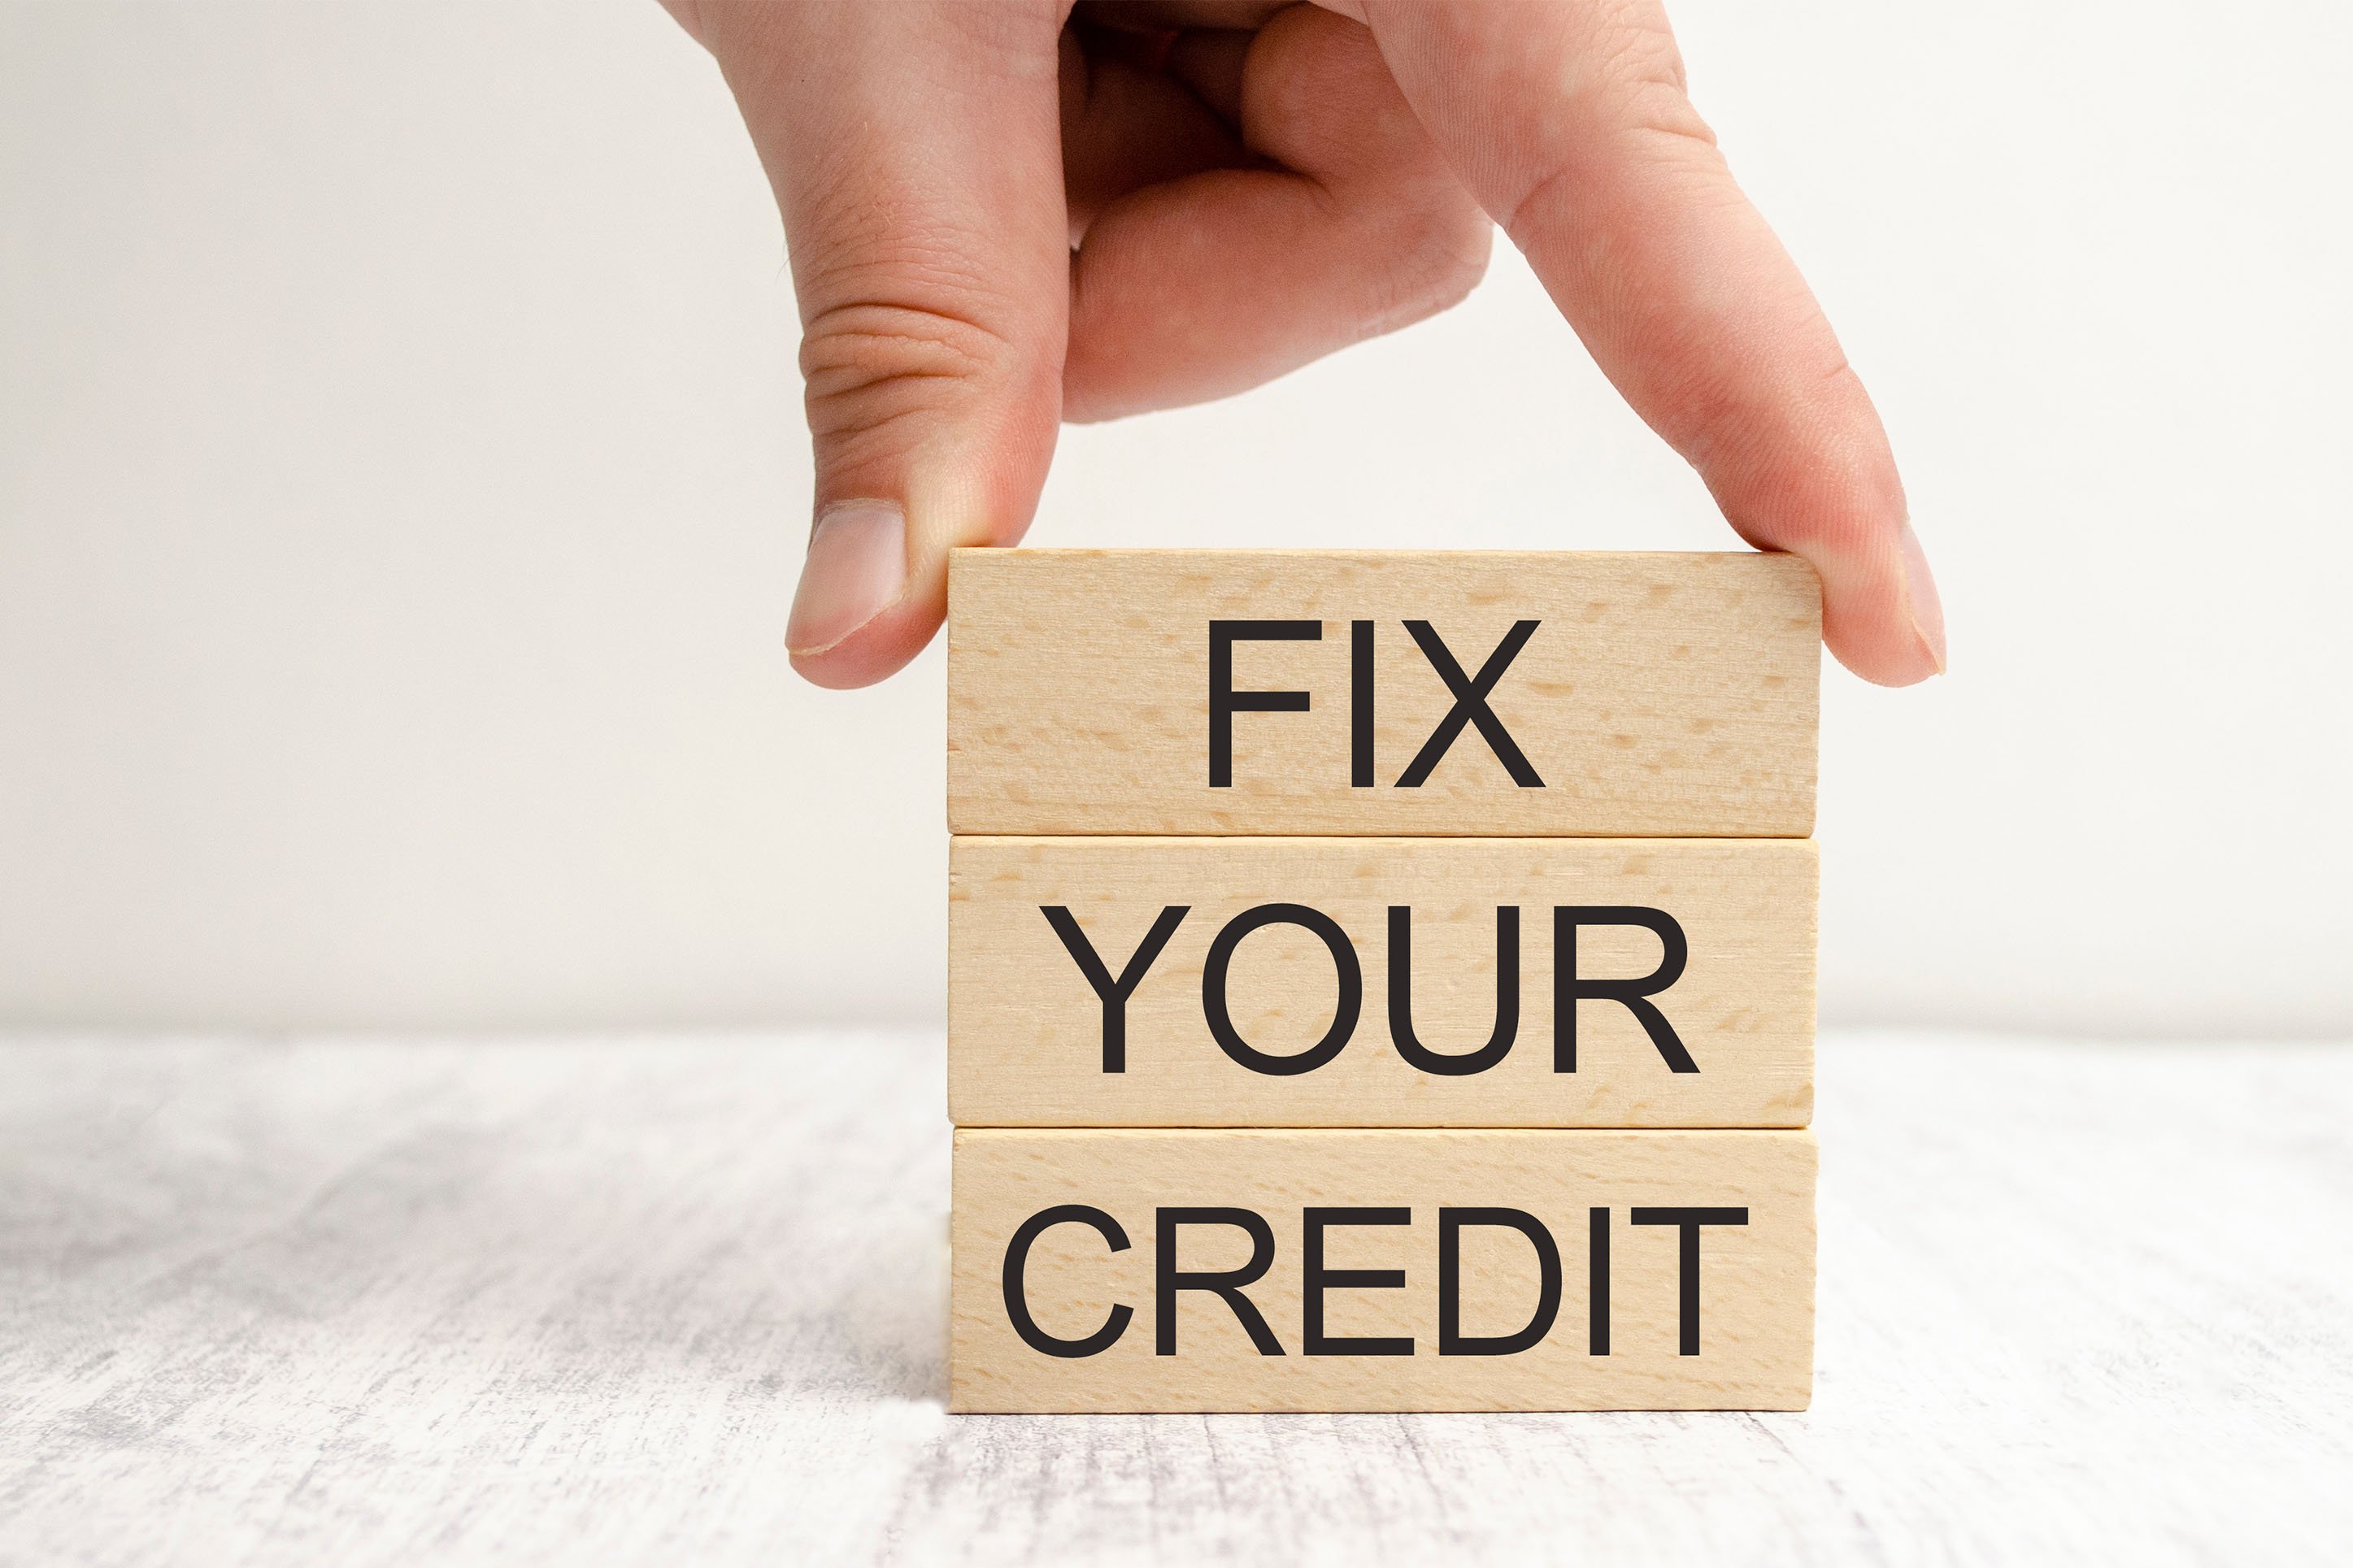 Fix Your Credit sign